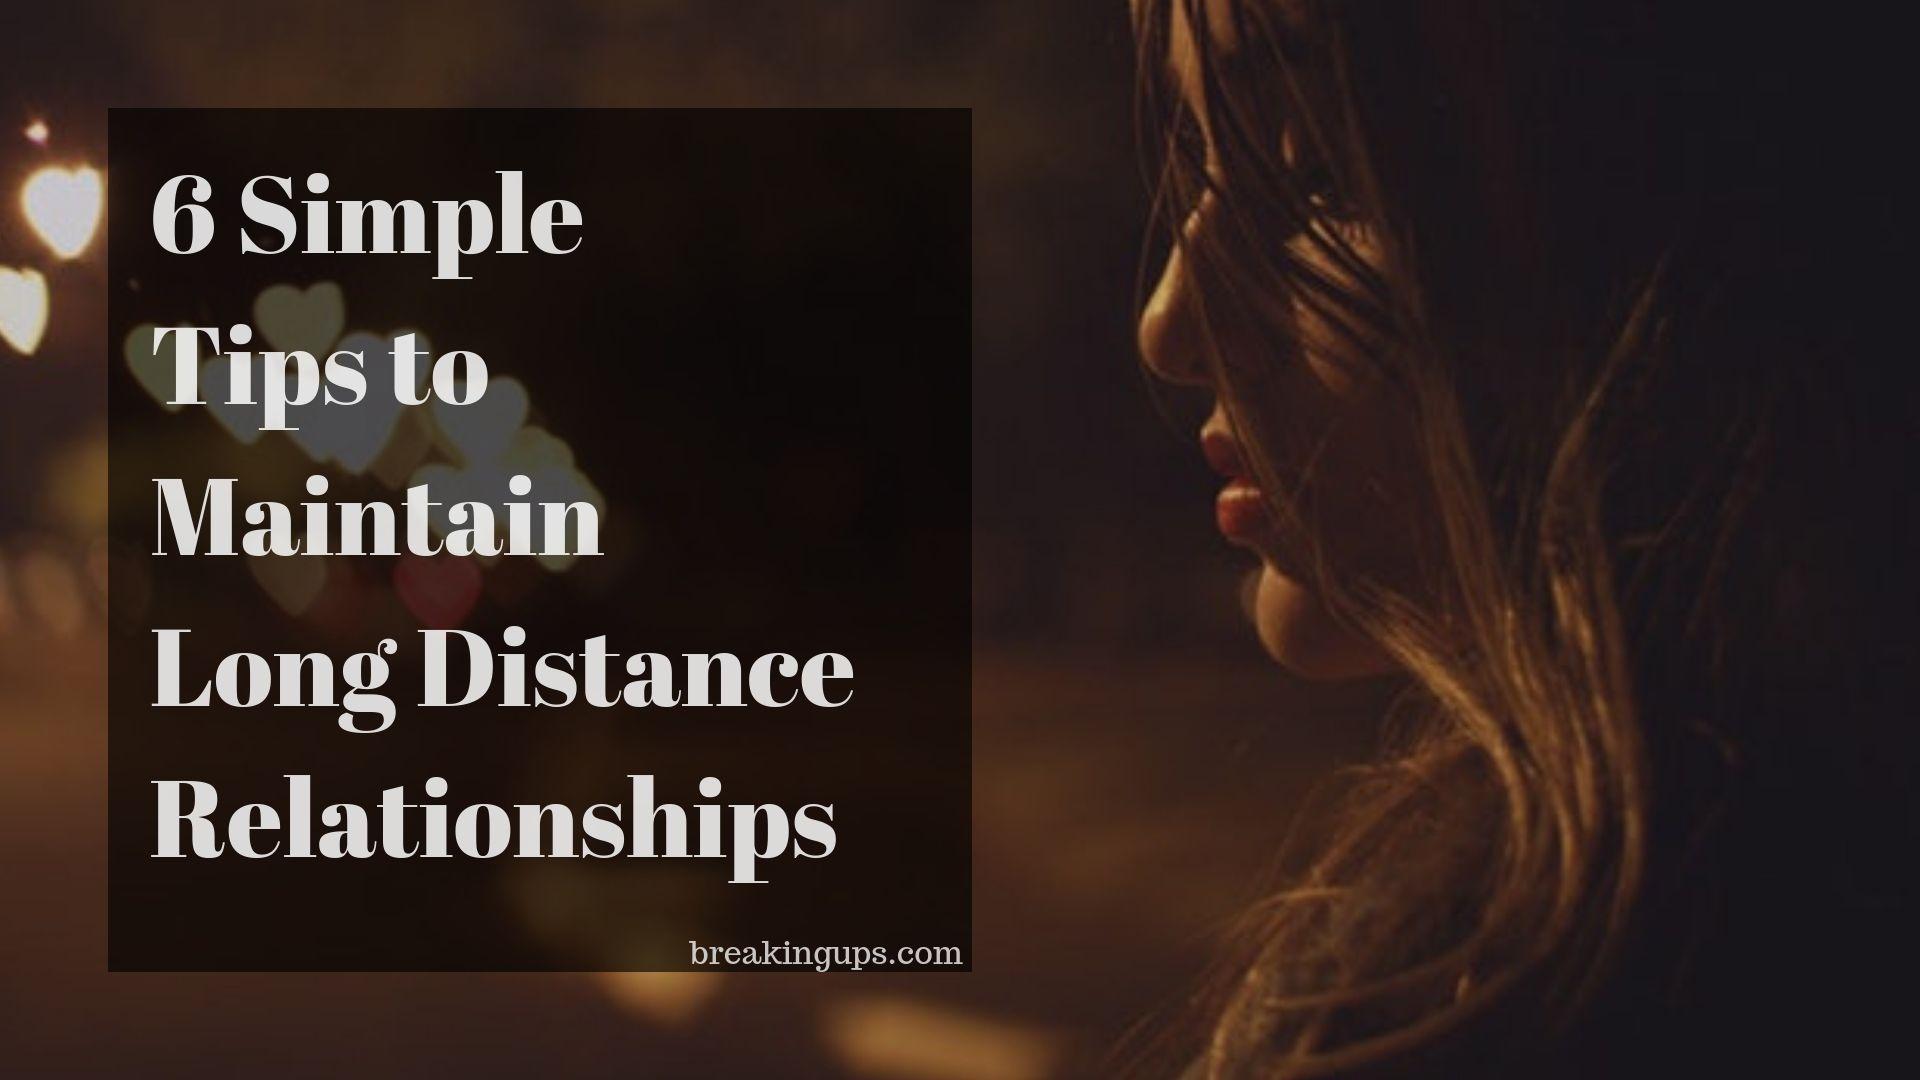 Simple Tips to Maintain Long Distance Relationships